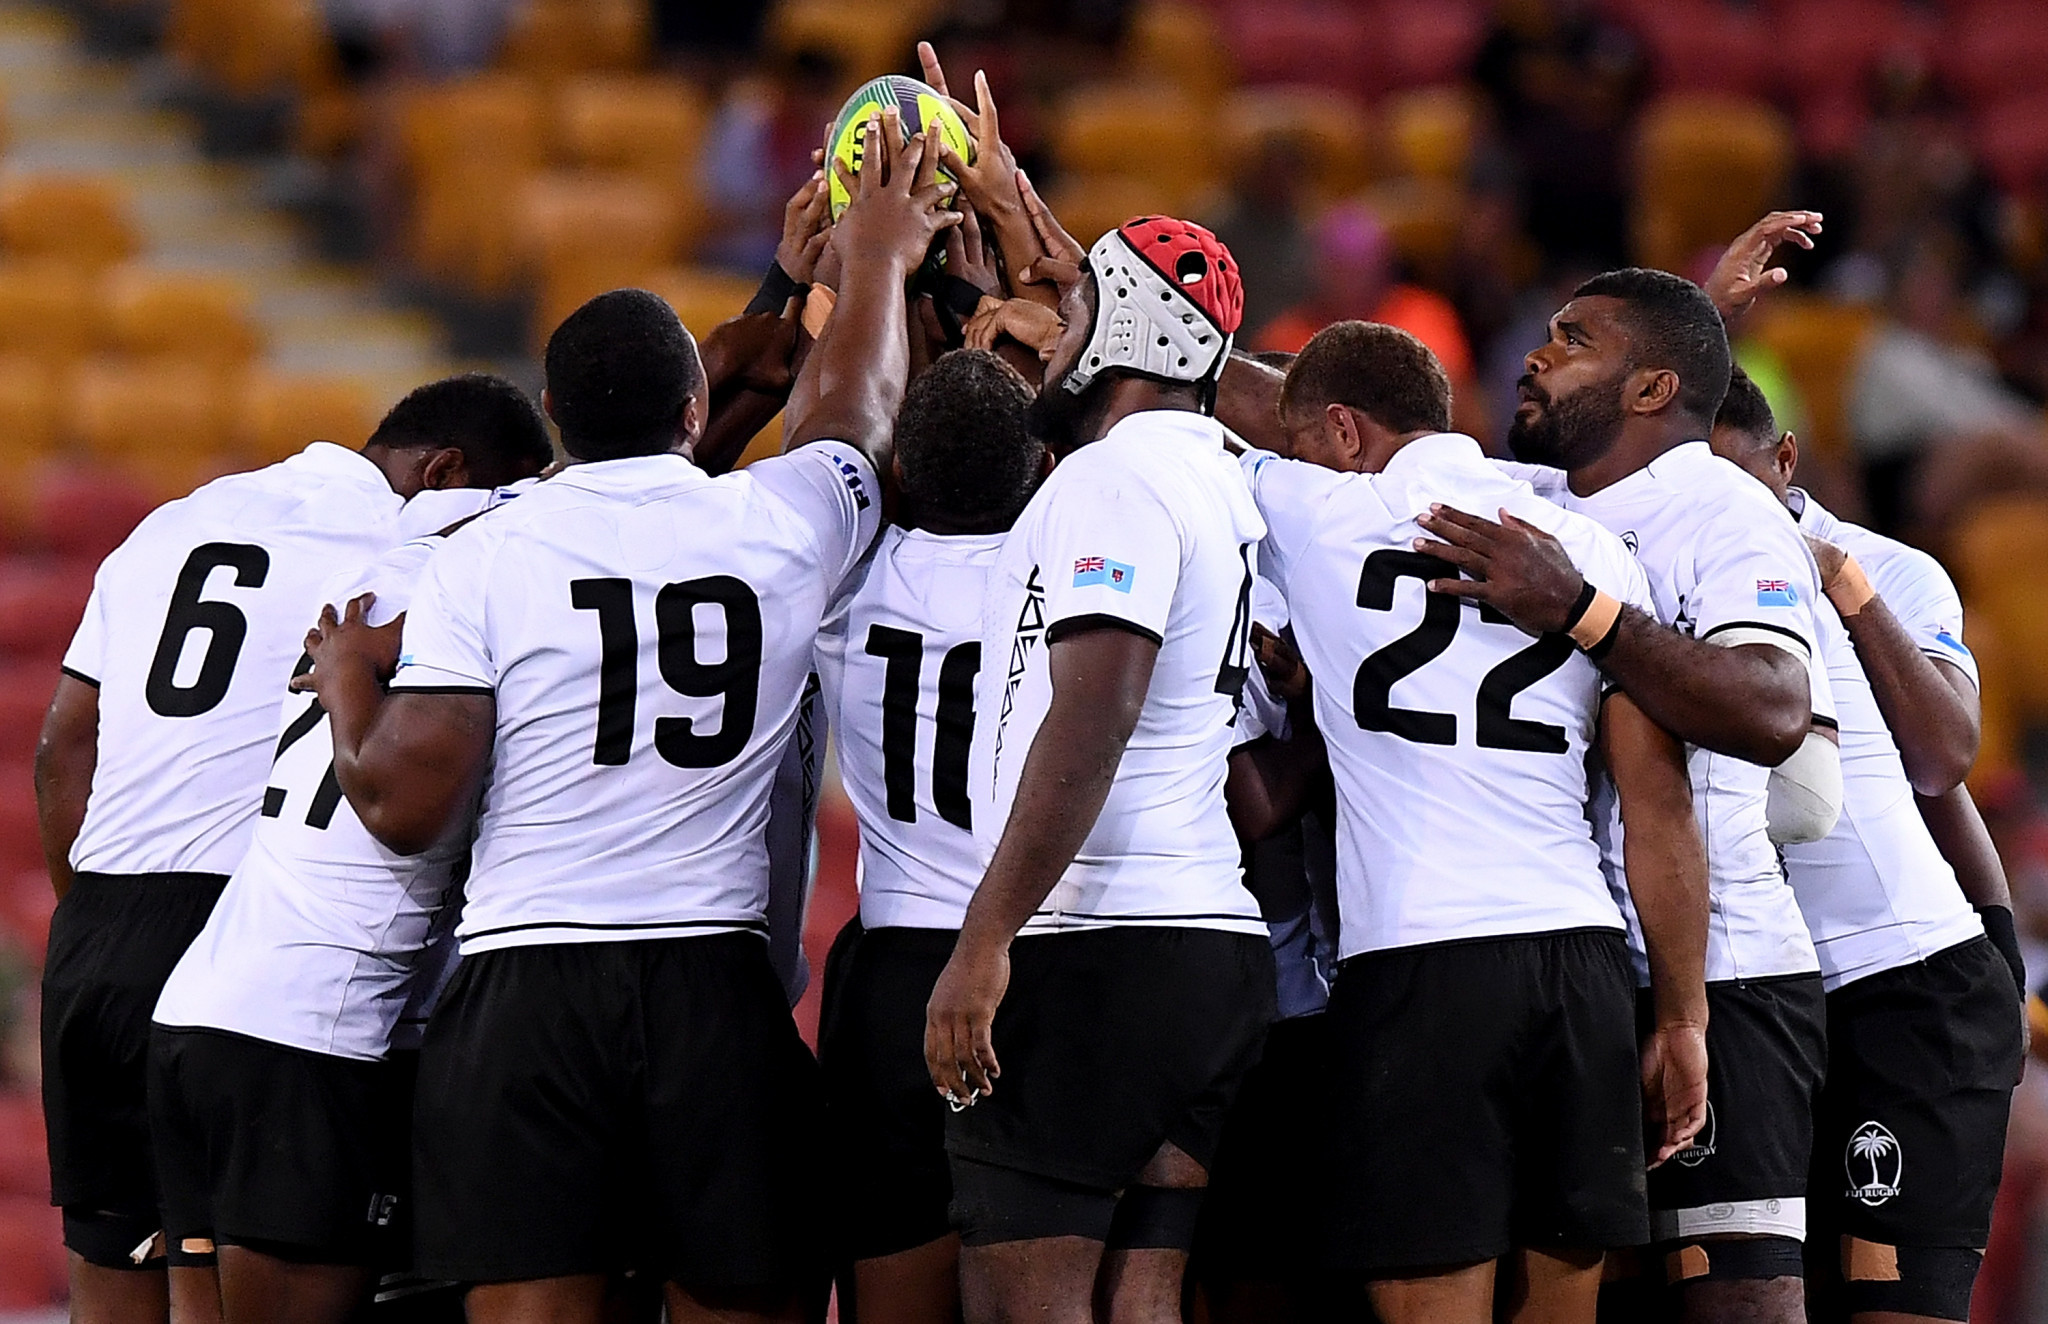 Fiji still waiting on visas for Rugby League Commonwealth Championship